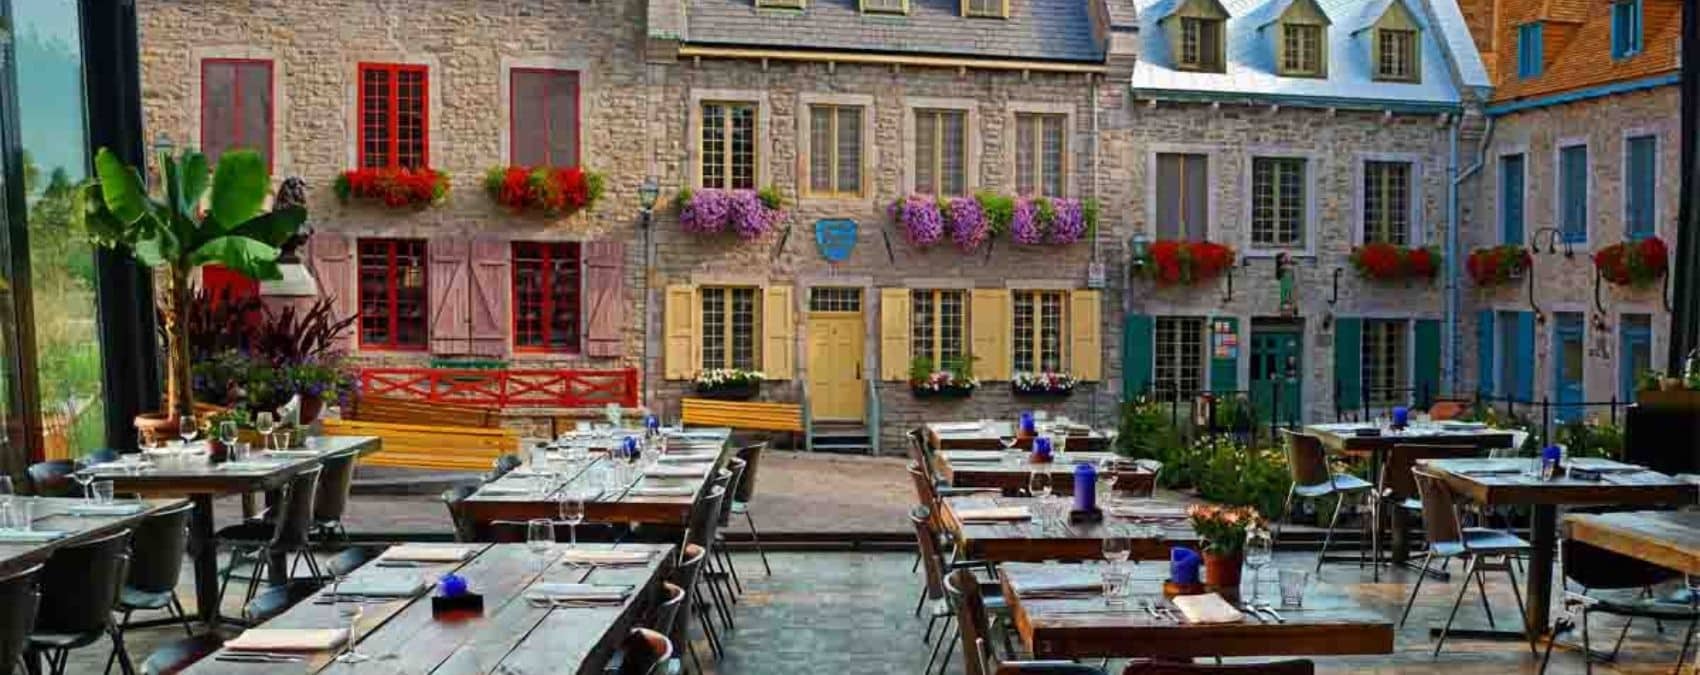 Quebec City Wallpaper, as seen on the wall of this dining room, is a photo mural of stone buildings at the Place Royale from About Murals.